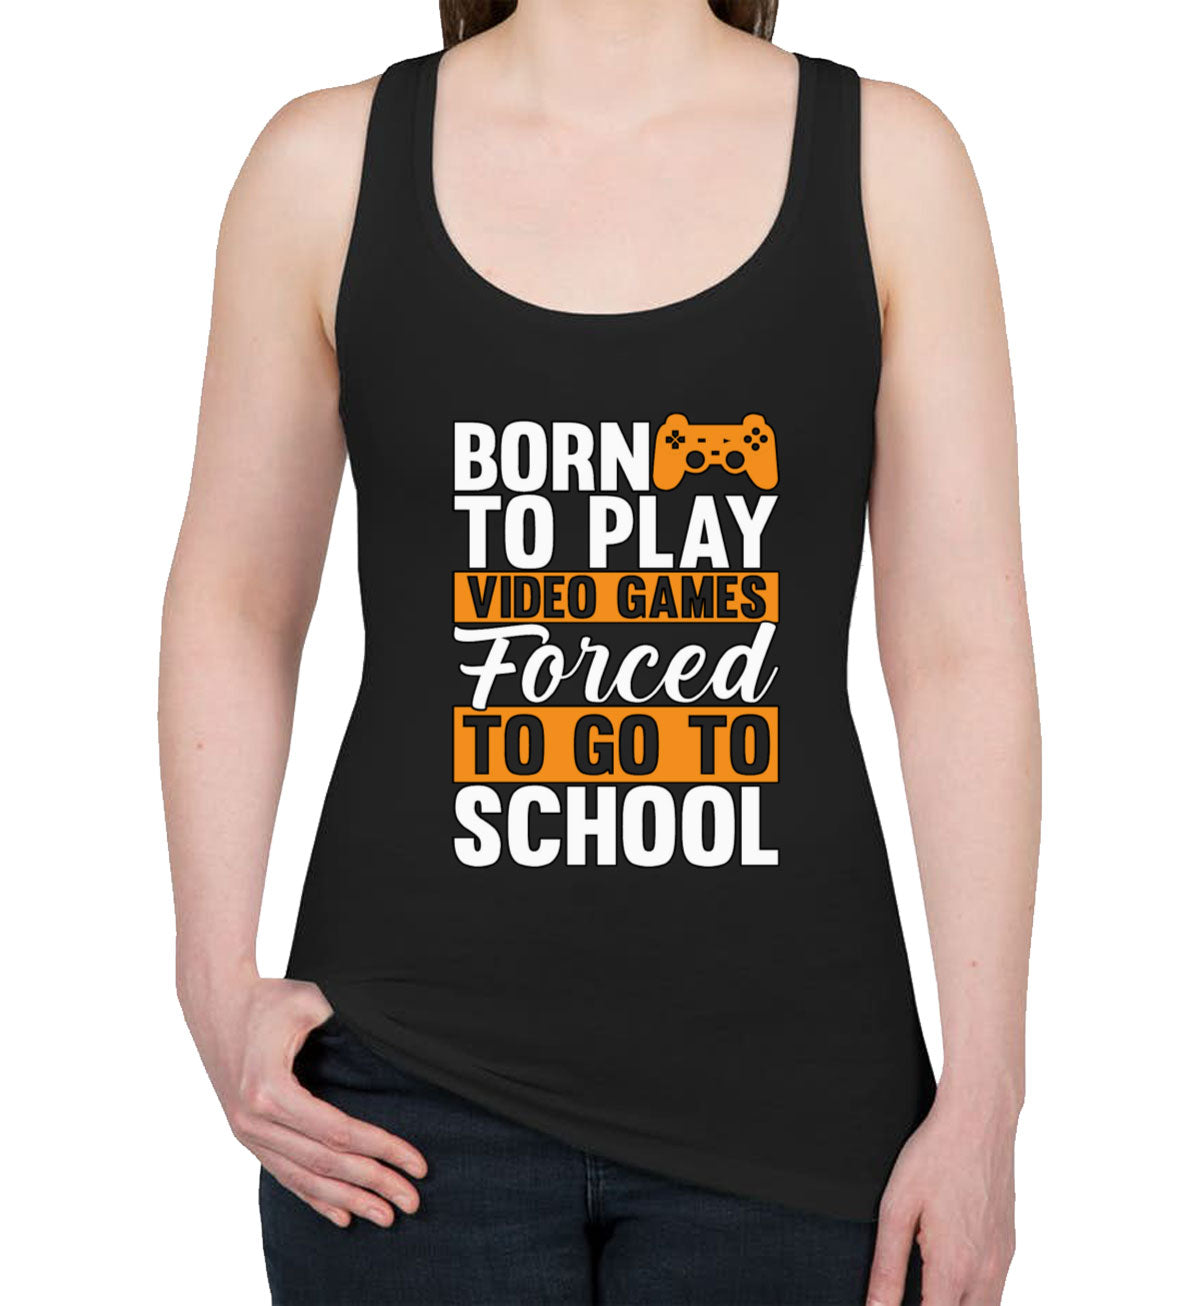 Born To Play Video Games Forced To Go To School Women's Racerback Tank Top